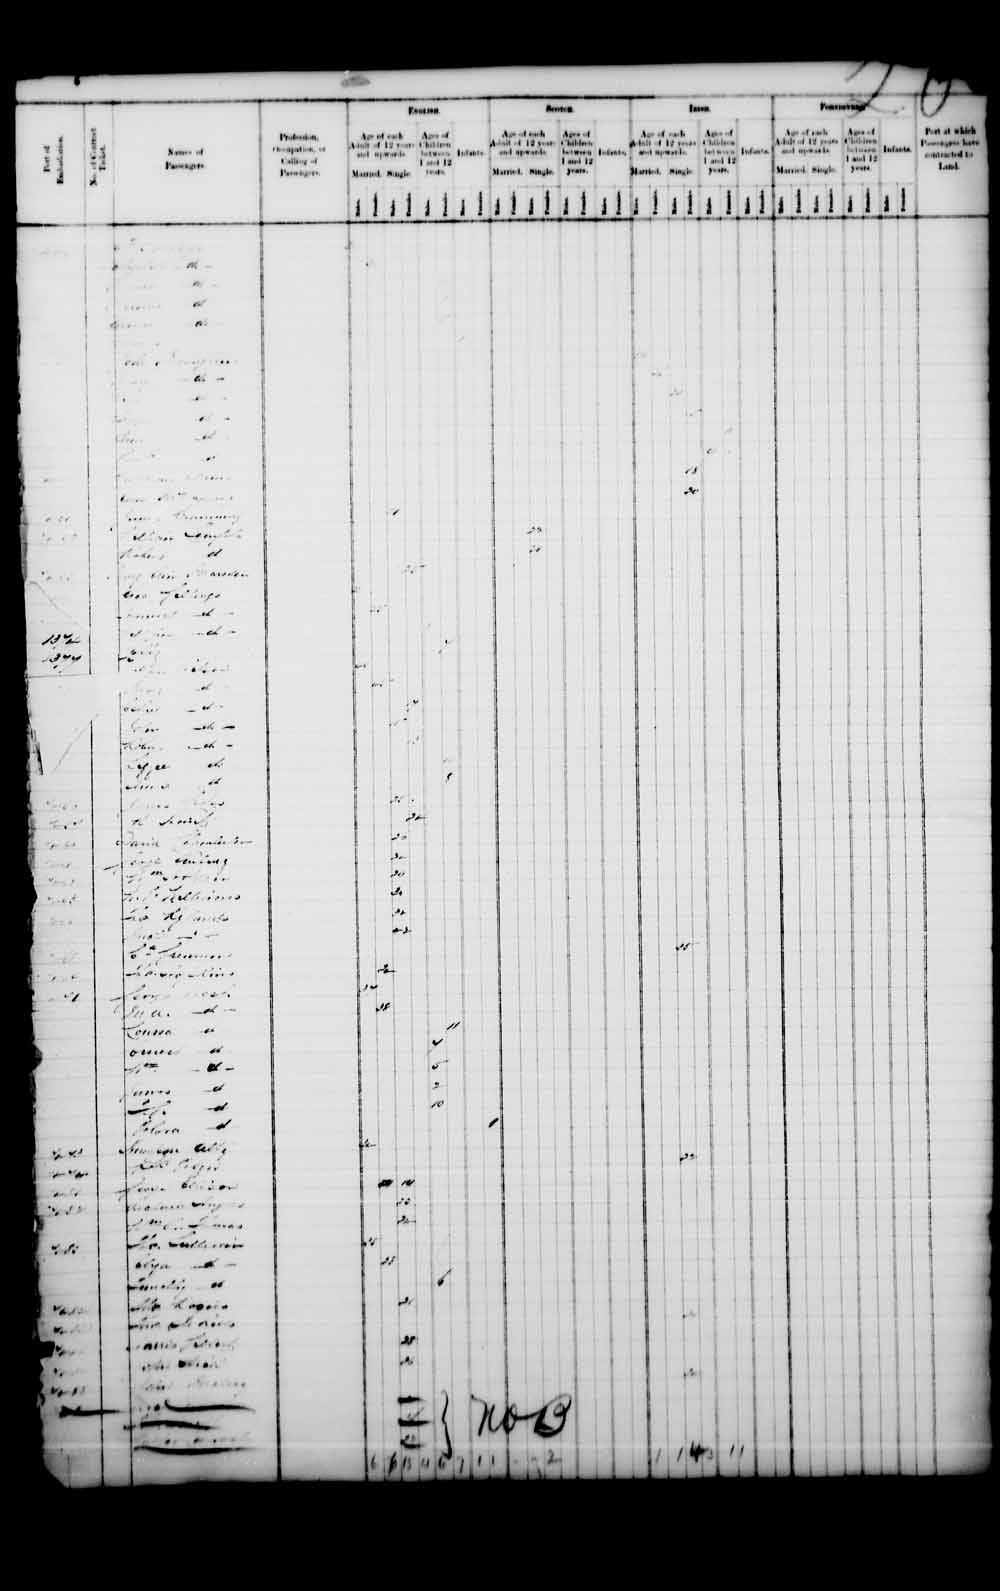 Digitized page of Passenger Lists for Image No.: e003541620